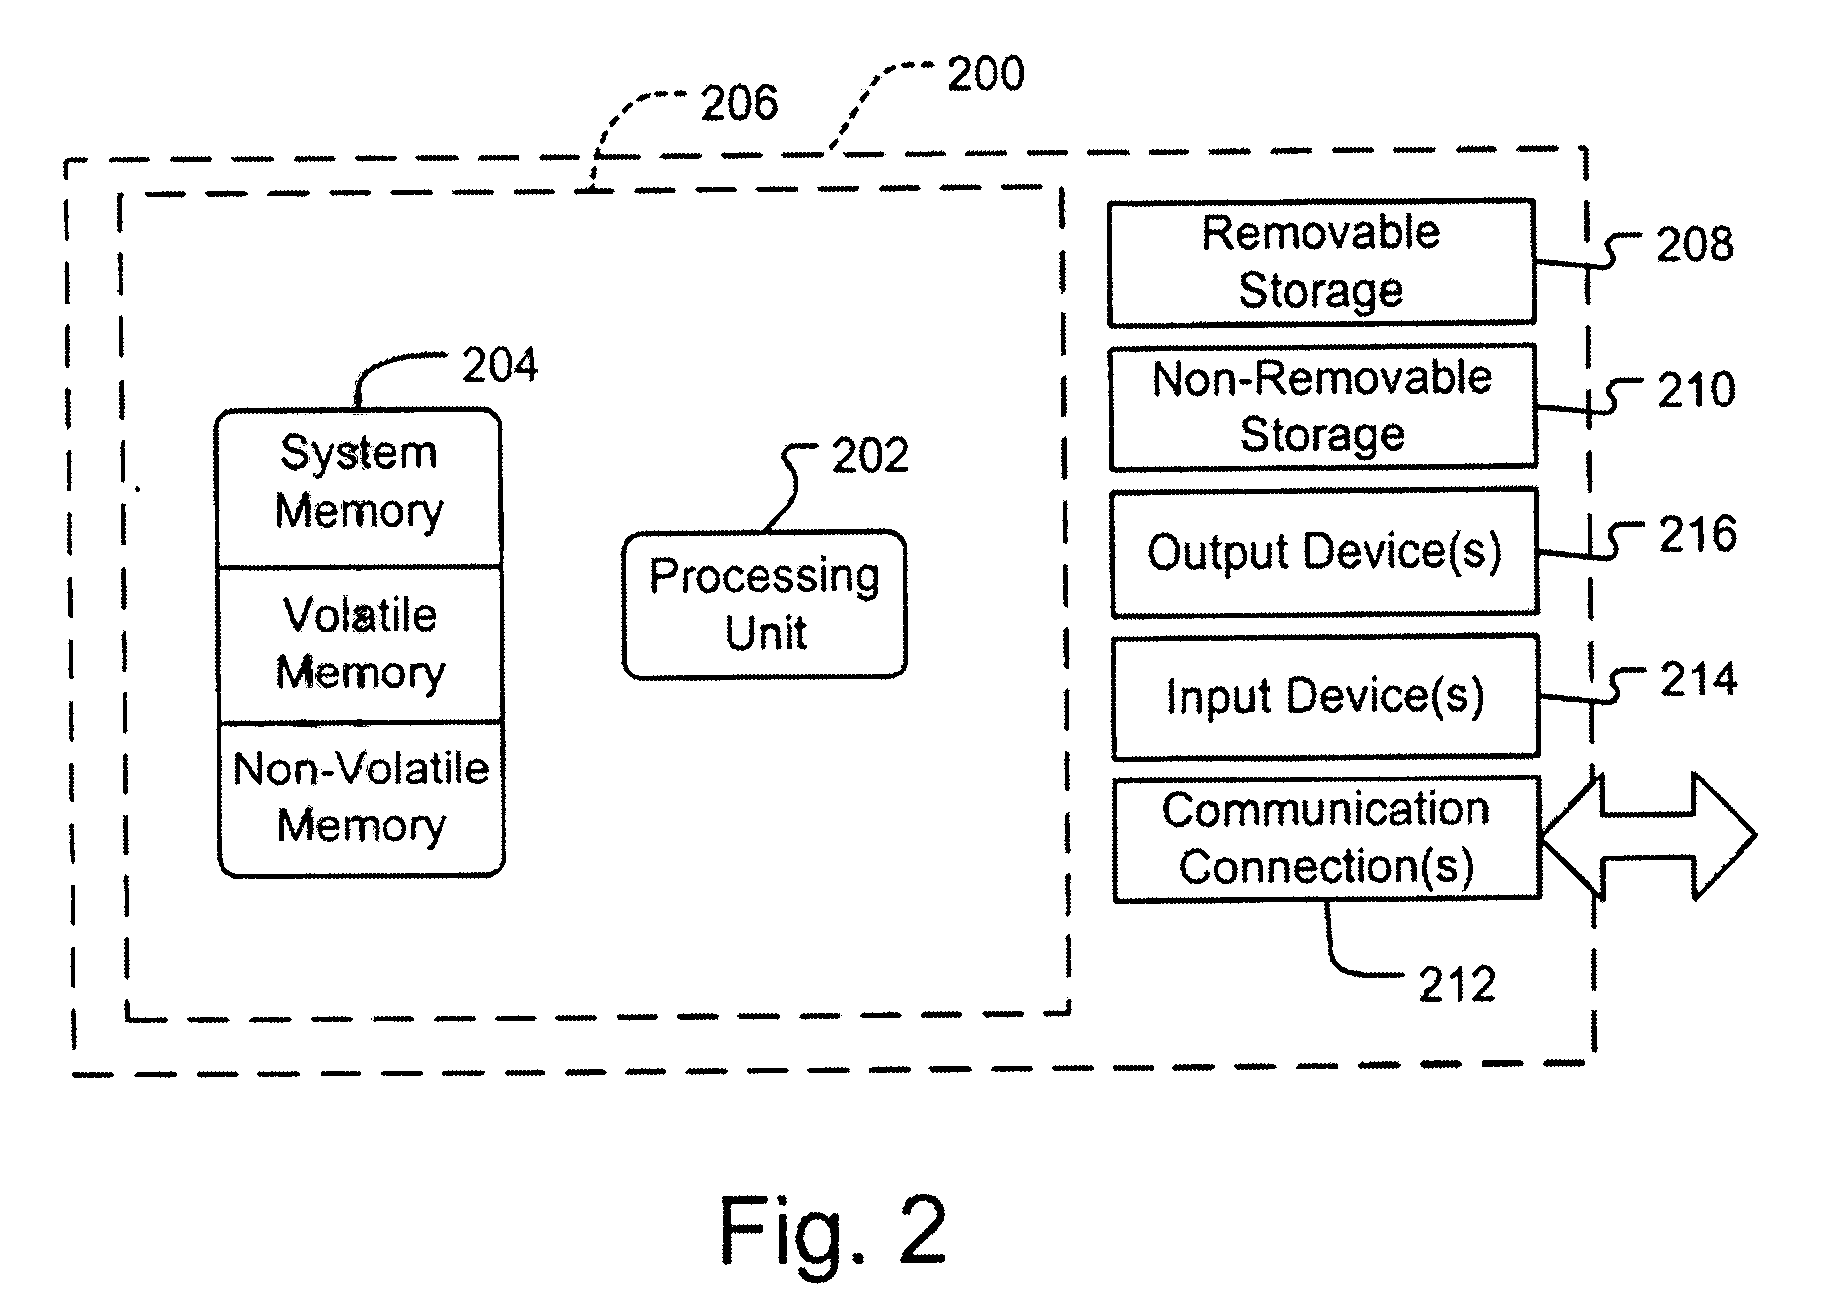 Method and System for Providing Long Distance Service